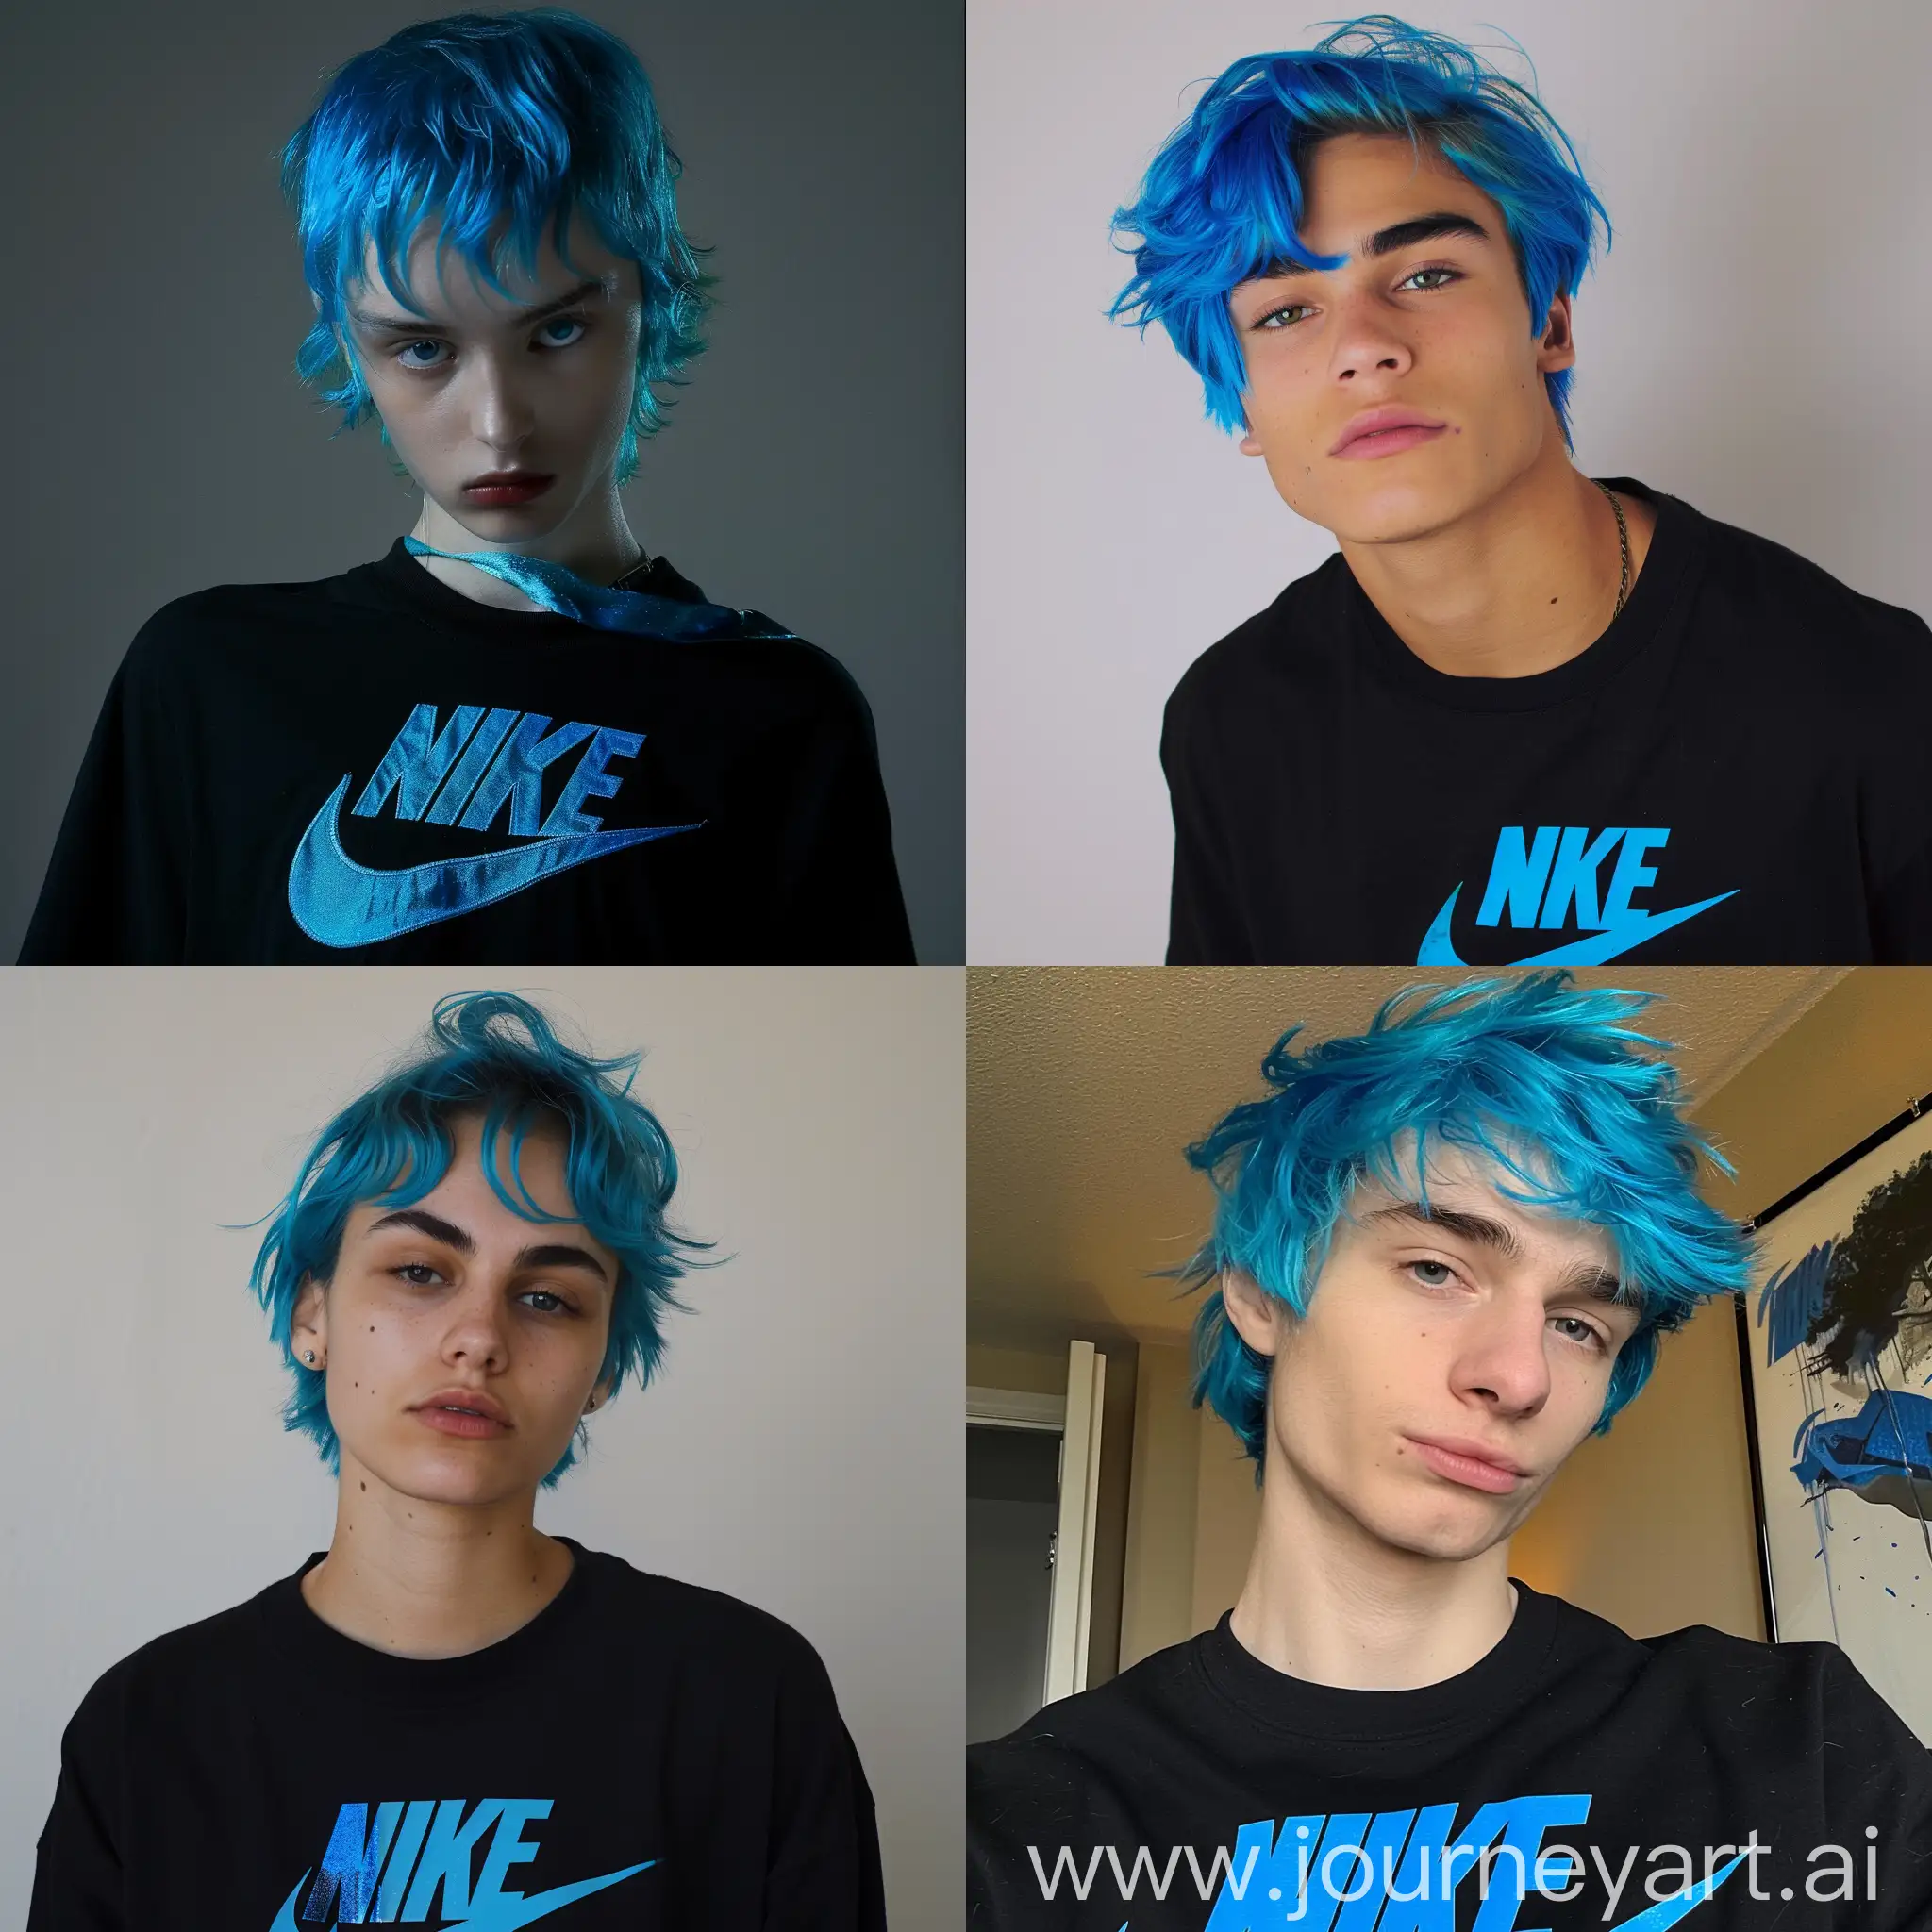 Human with Blue Hair and Black shirt there is a blue looks like Nike Logo but without nike text